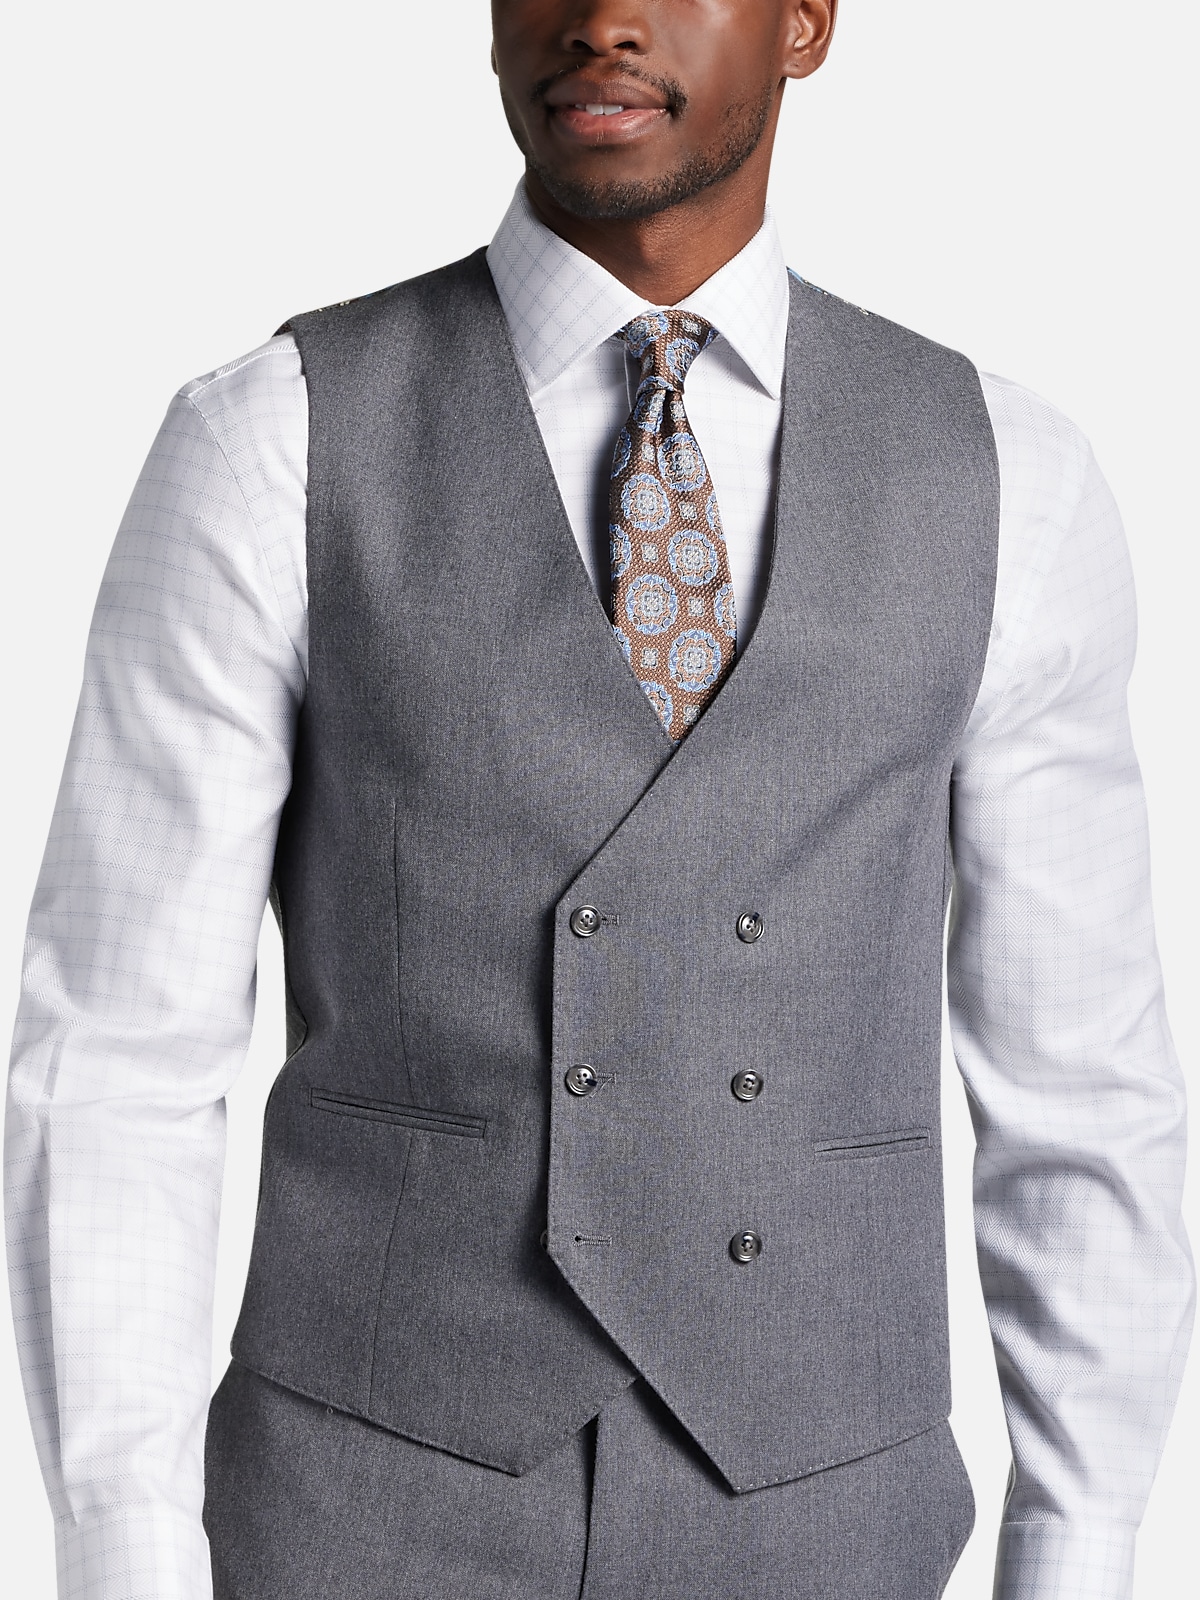 Tayion Classic Fit Suit Separates Vest | All Clothing| Men's Wearhouse